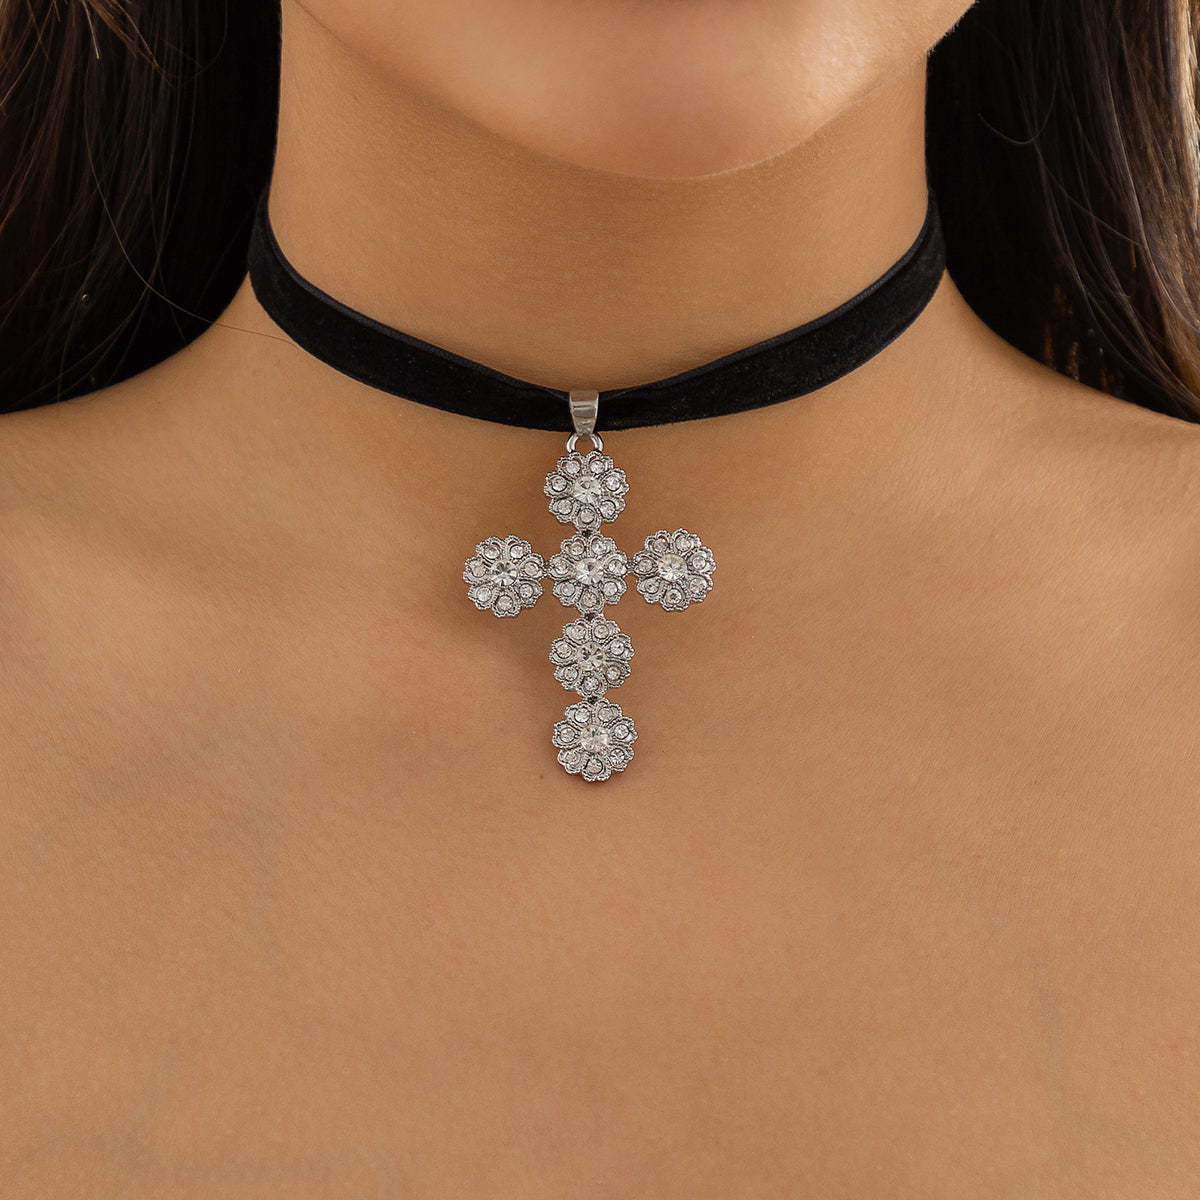 Primary image for Cubic Zirconia Silver-Plated Flower Cross Pendant Choker